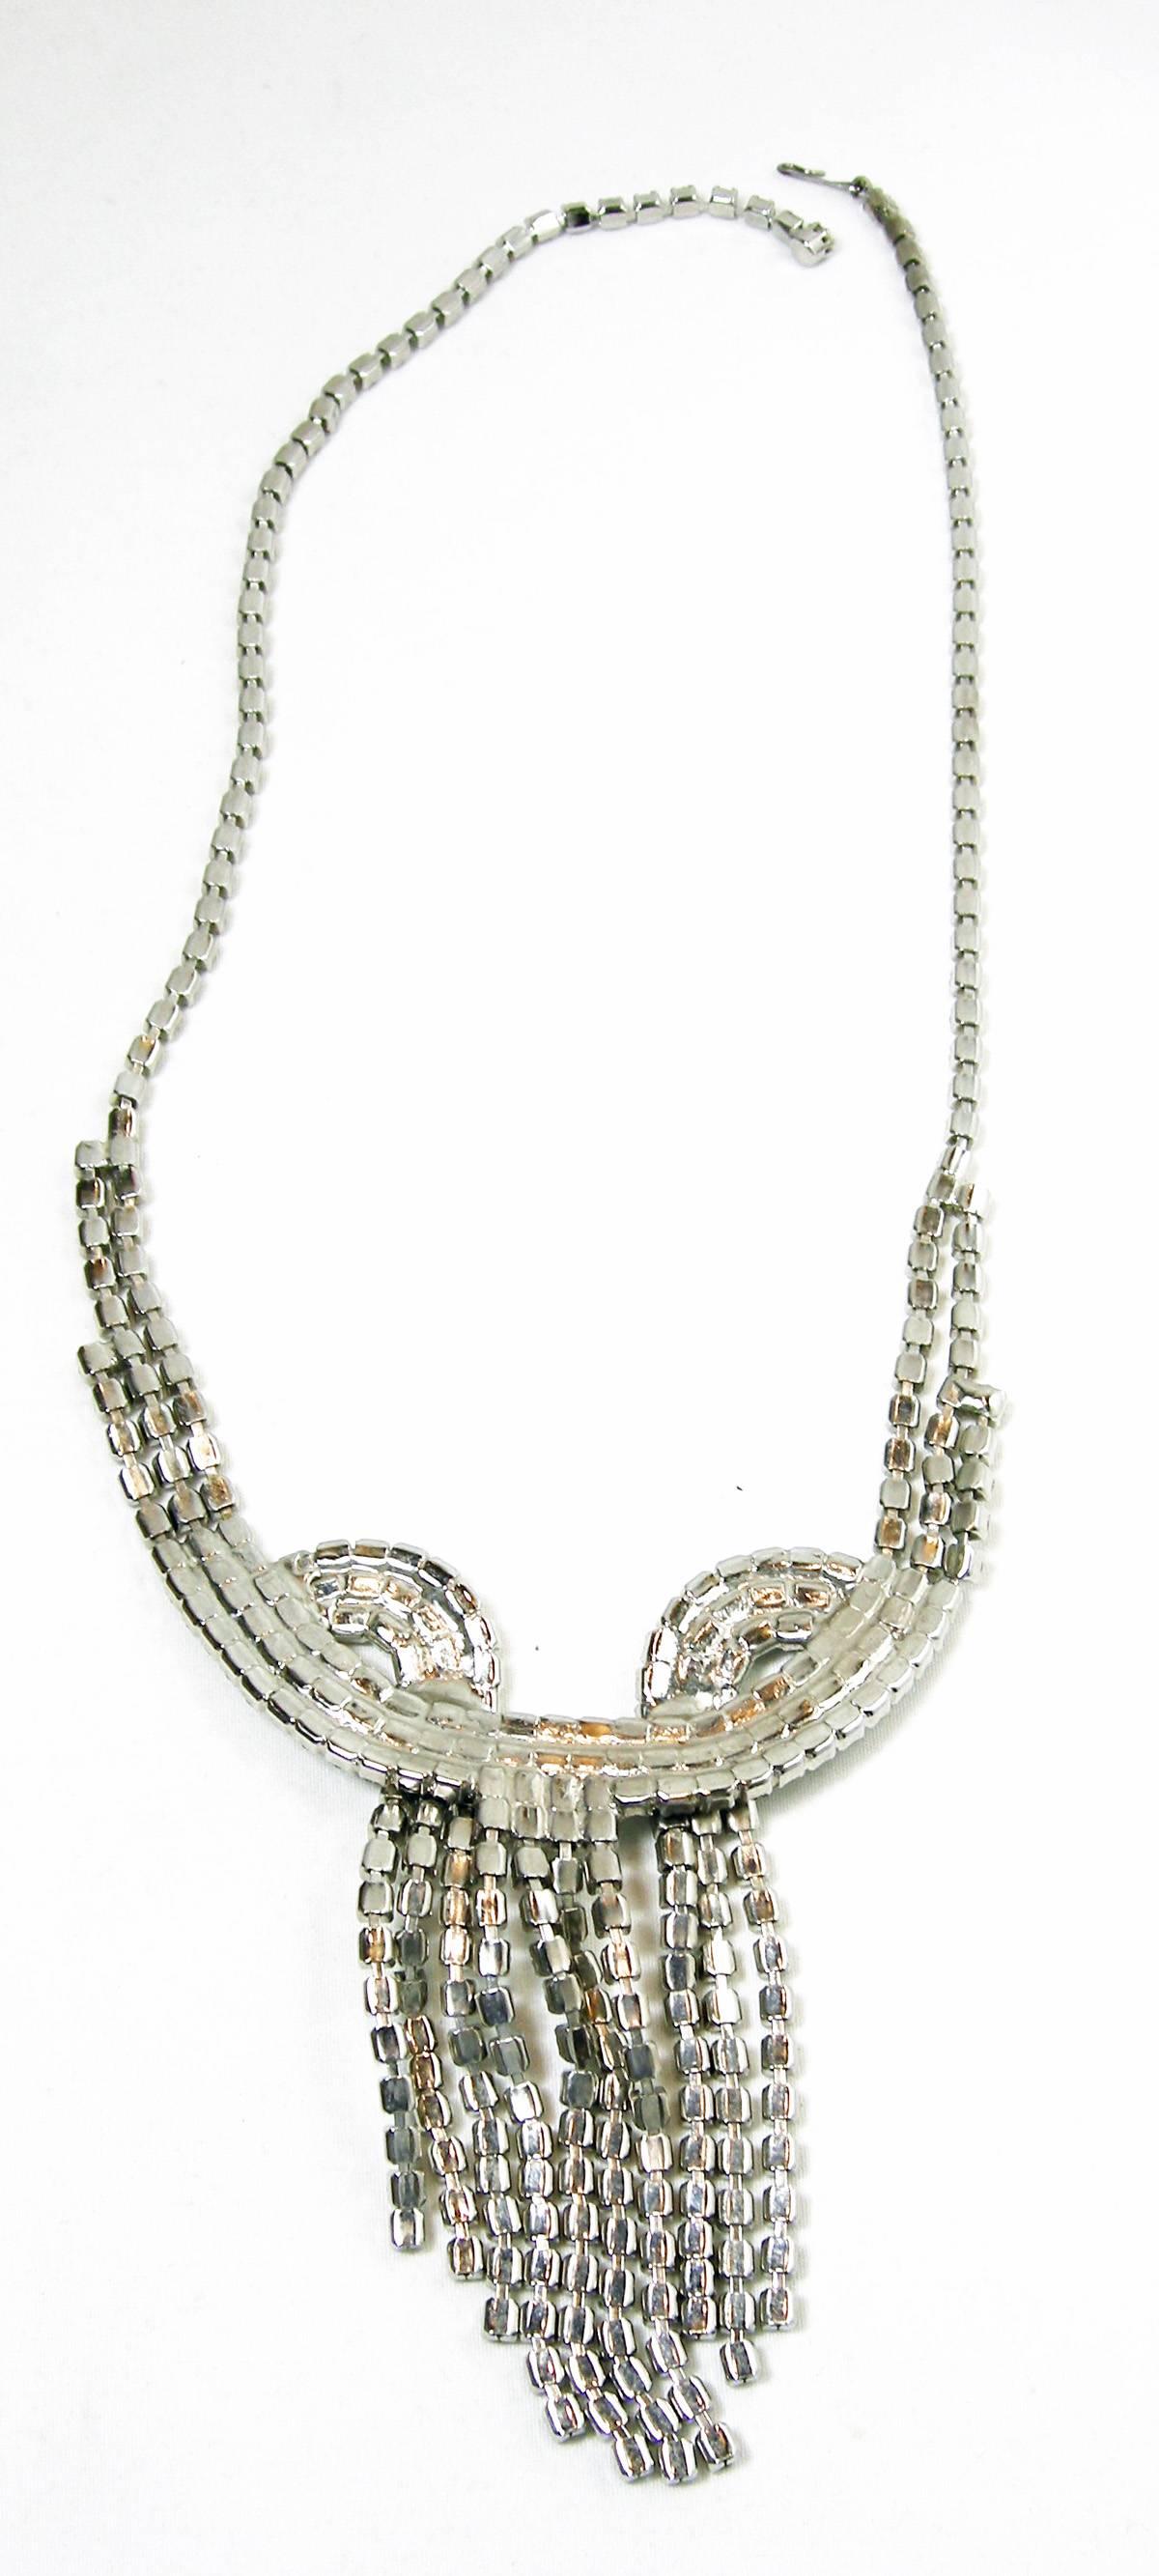 This vintage 1950s rhinestone necklace features a centerpiece that has a looped design with 10 cascading rhinestone strands that form a wide tassel. There are 3 strands on each side but they lead to a single strand necklace. This necklace has a hook